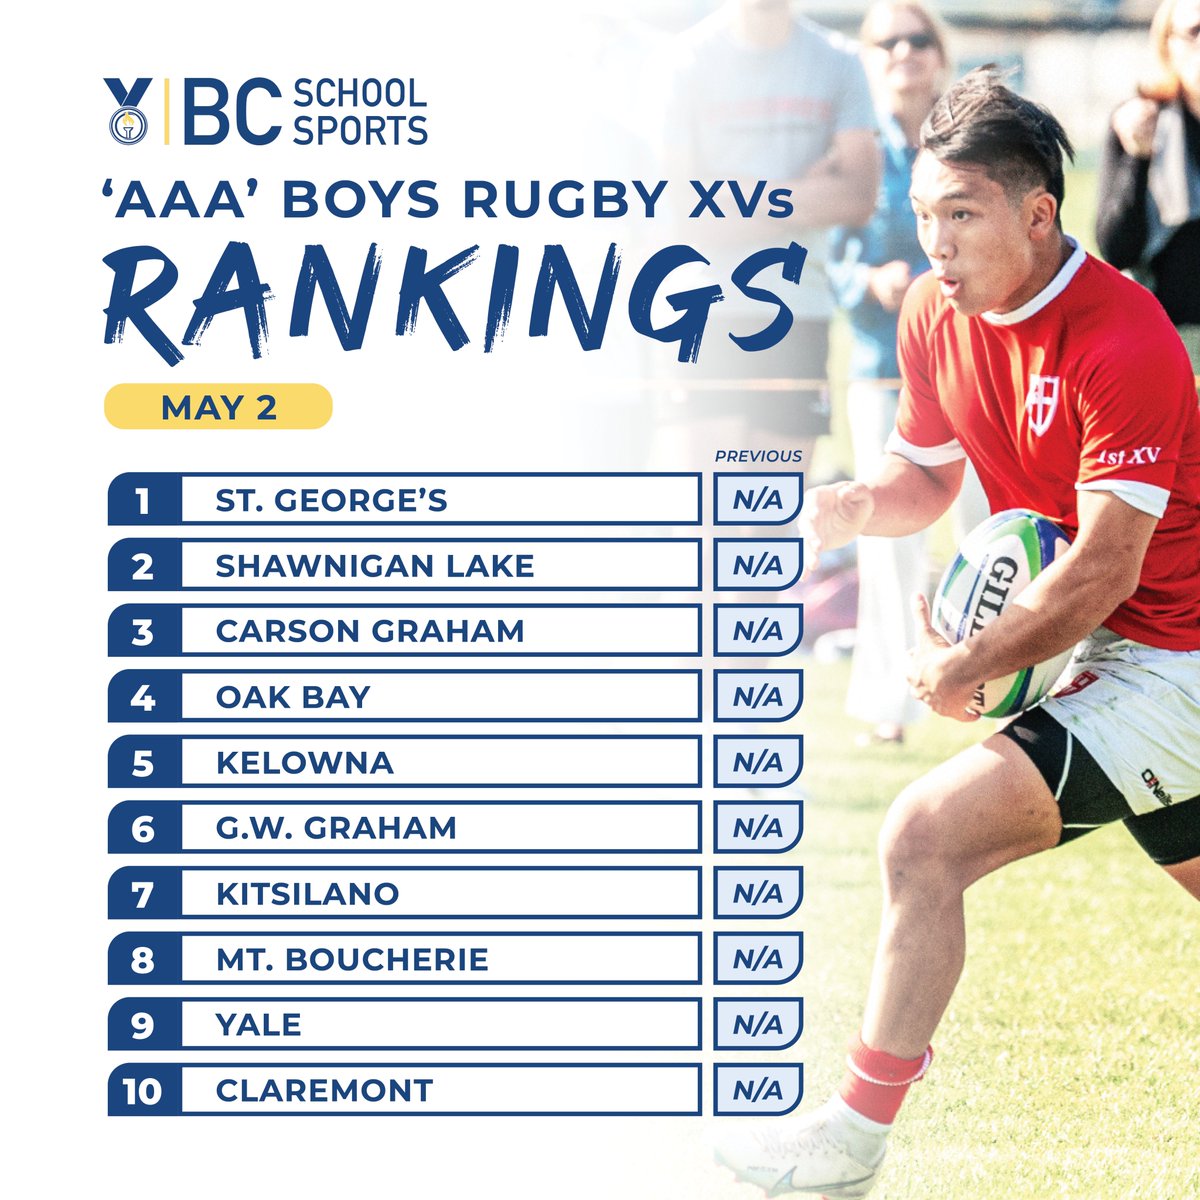 Introducing the BCSS 2A & 3A Boys Rugby XVs Rankings. Looking forward to the Stadium Series matches this week! #BCSSRankings